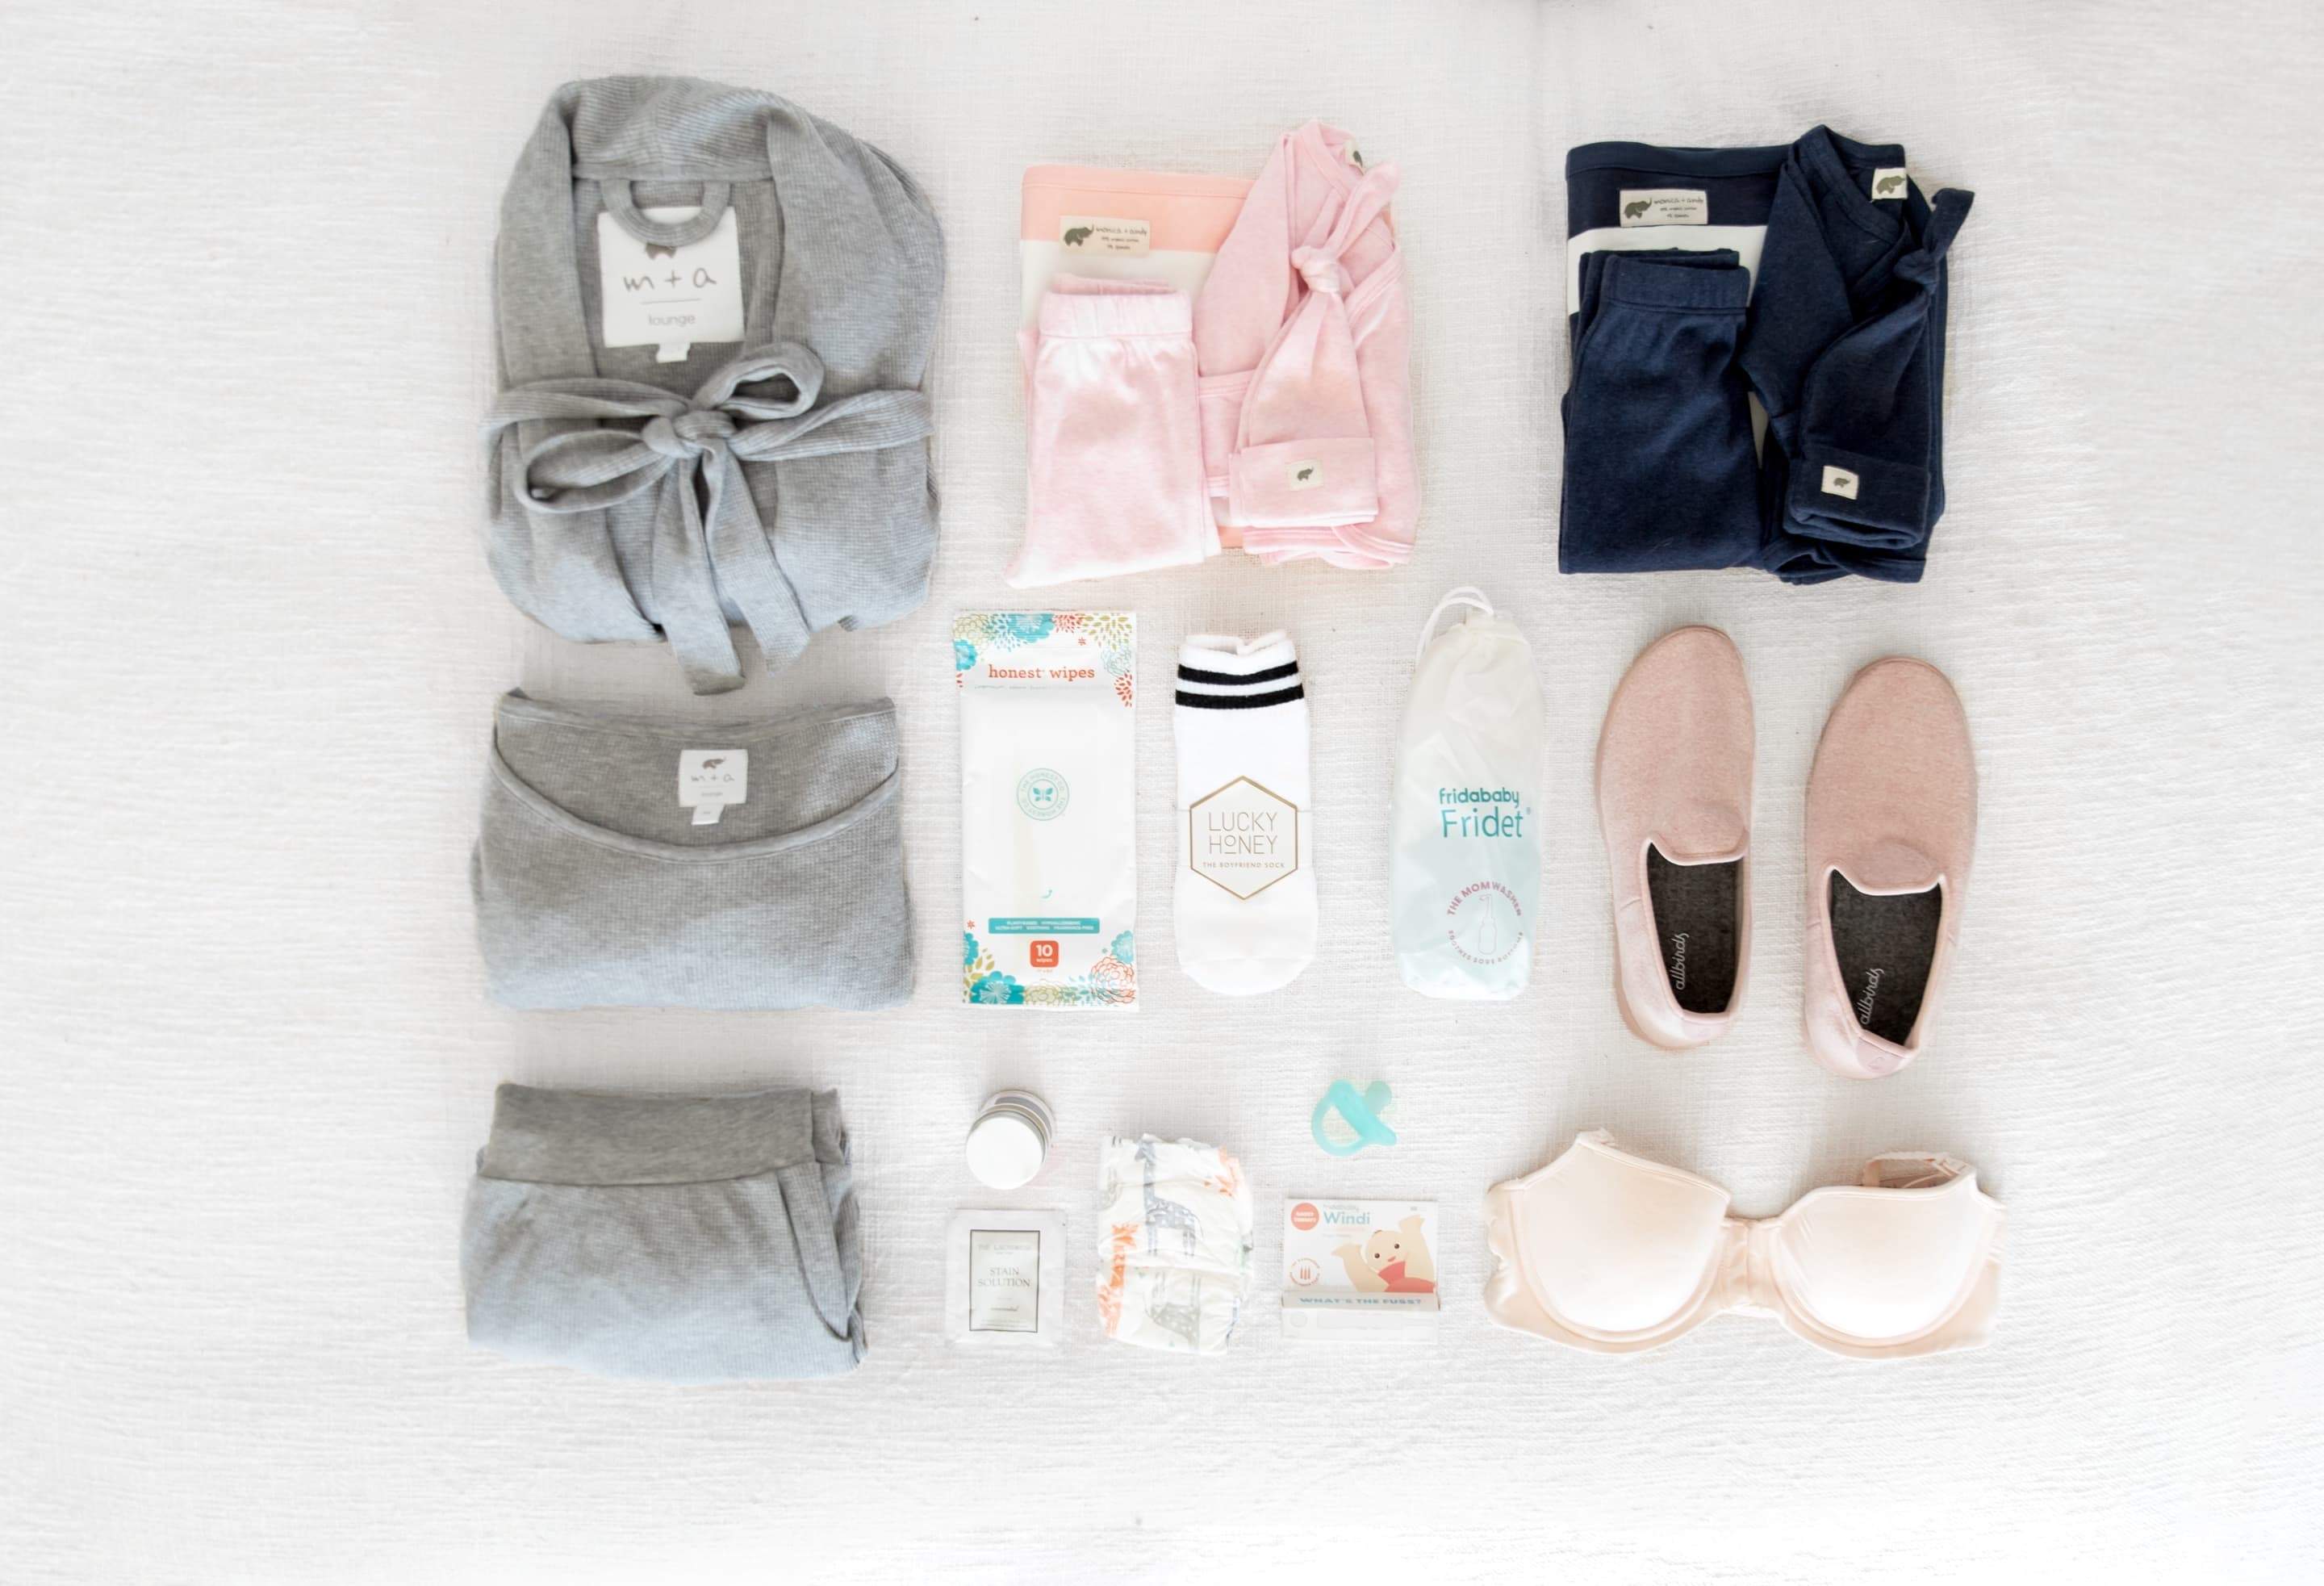 Monica + Andy's Hospital Bag Checklist Is Here!